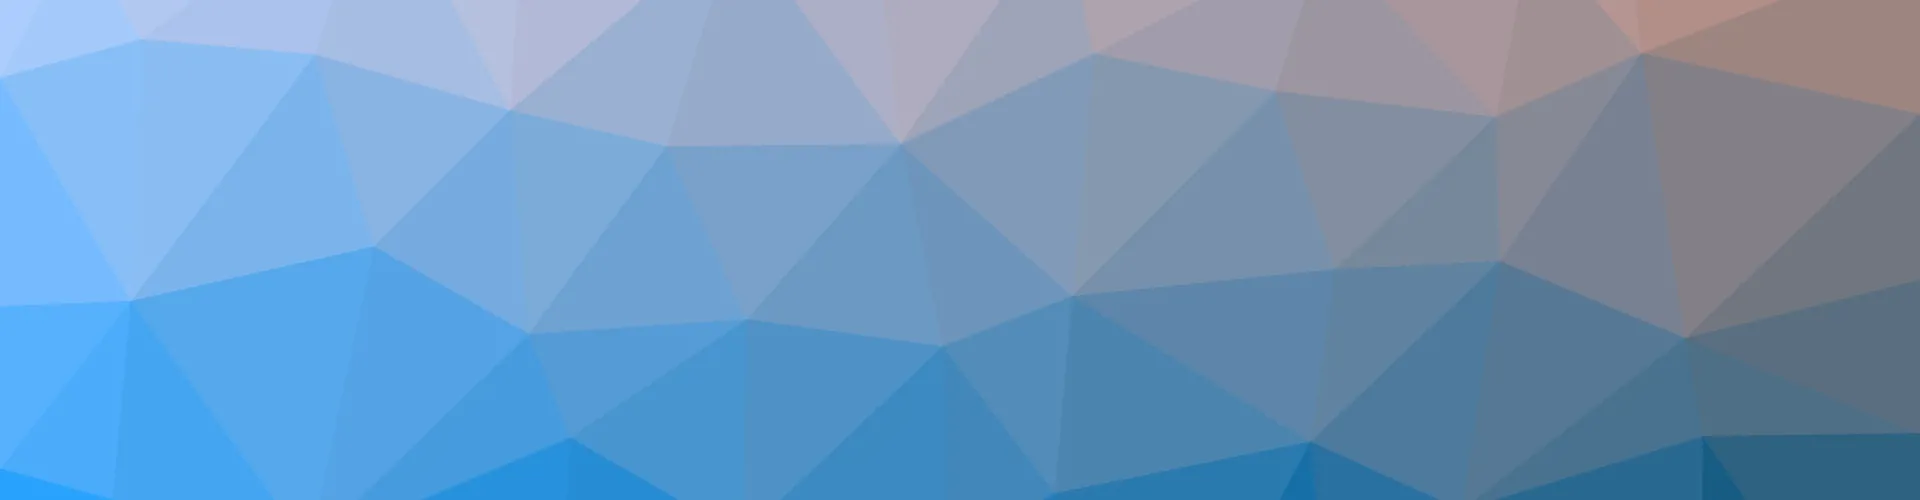 abstract background consisting of triangles. Gradient color from blue to pink